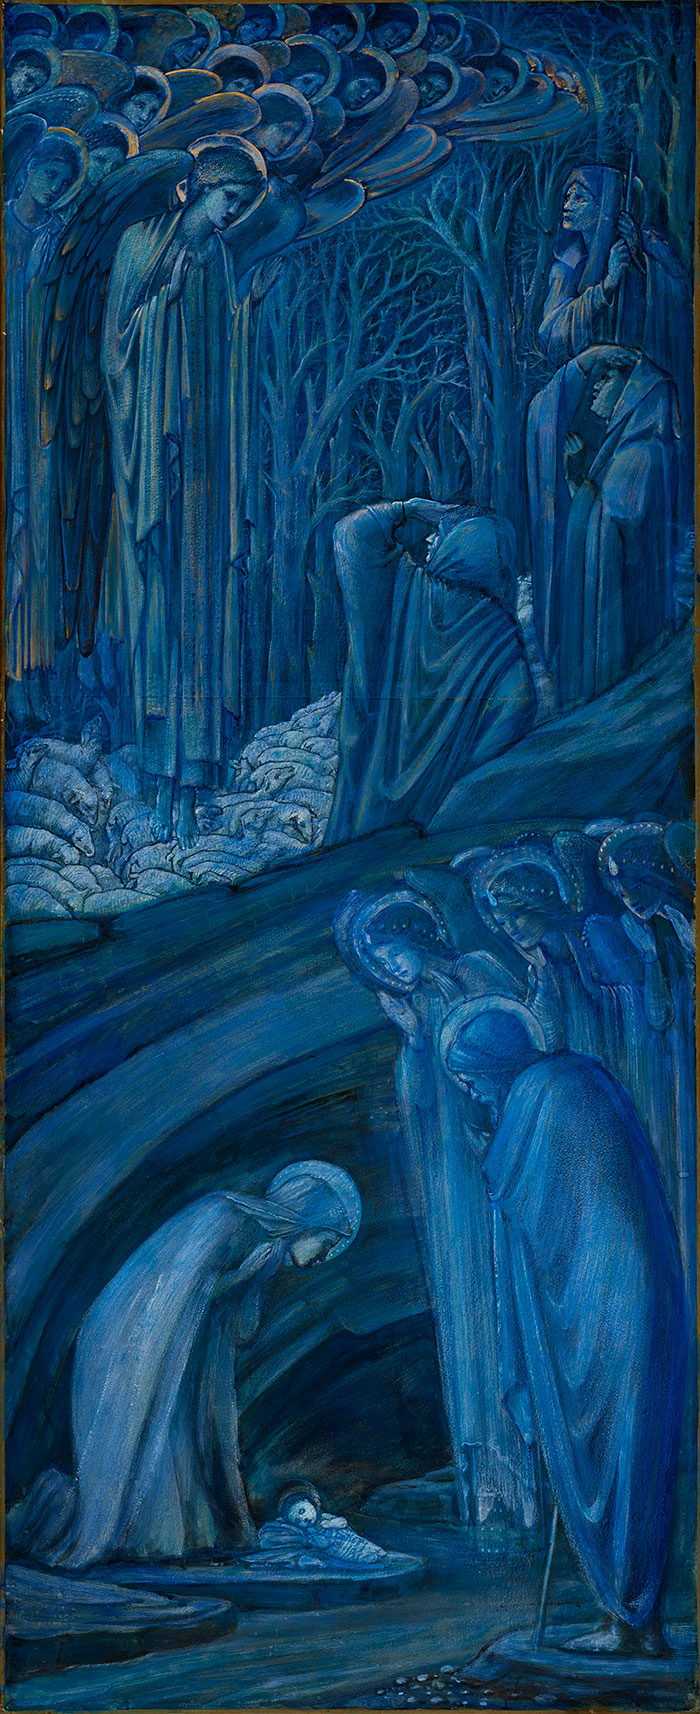 Edward Coley Burne-Jones (1833–1898), The Nativity, watercolor and bodycolor, heightened with gold, on two joined sheets of paper, 56 3⁄4 x 231⁄8 in. (144.1 x 58.7 cm.). The Huntington Library, Art Collections, and Botanical Gardens.